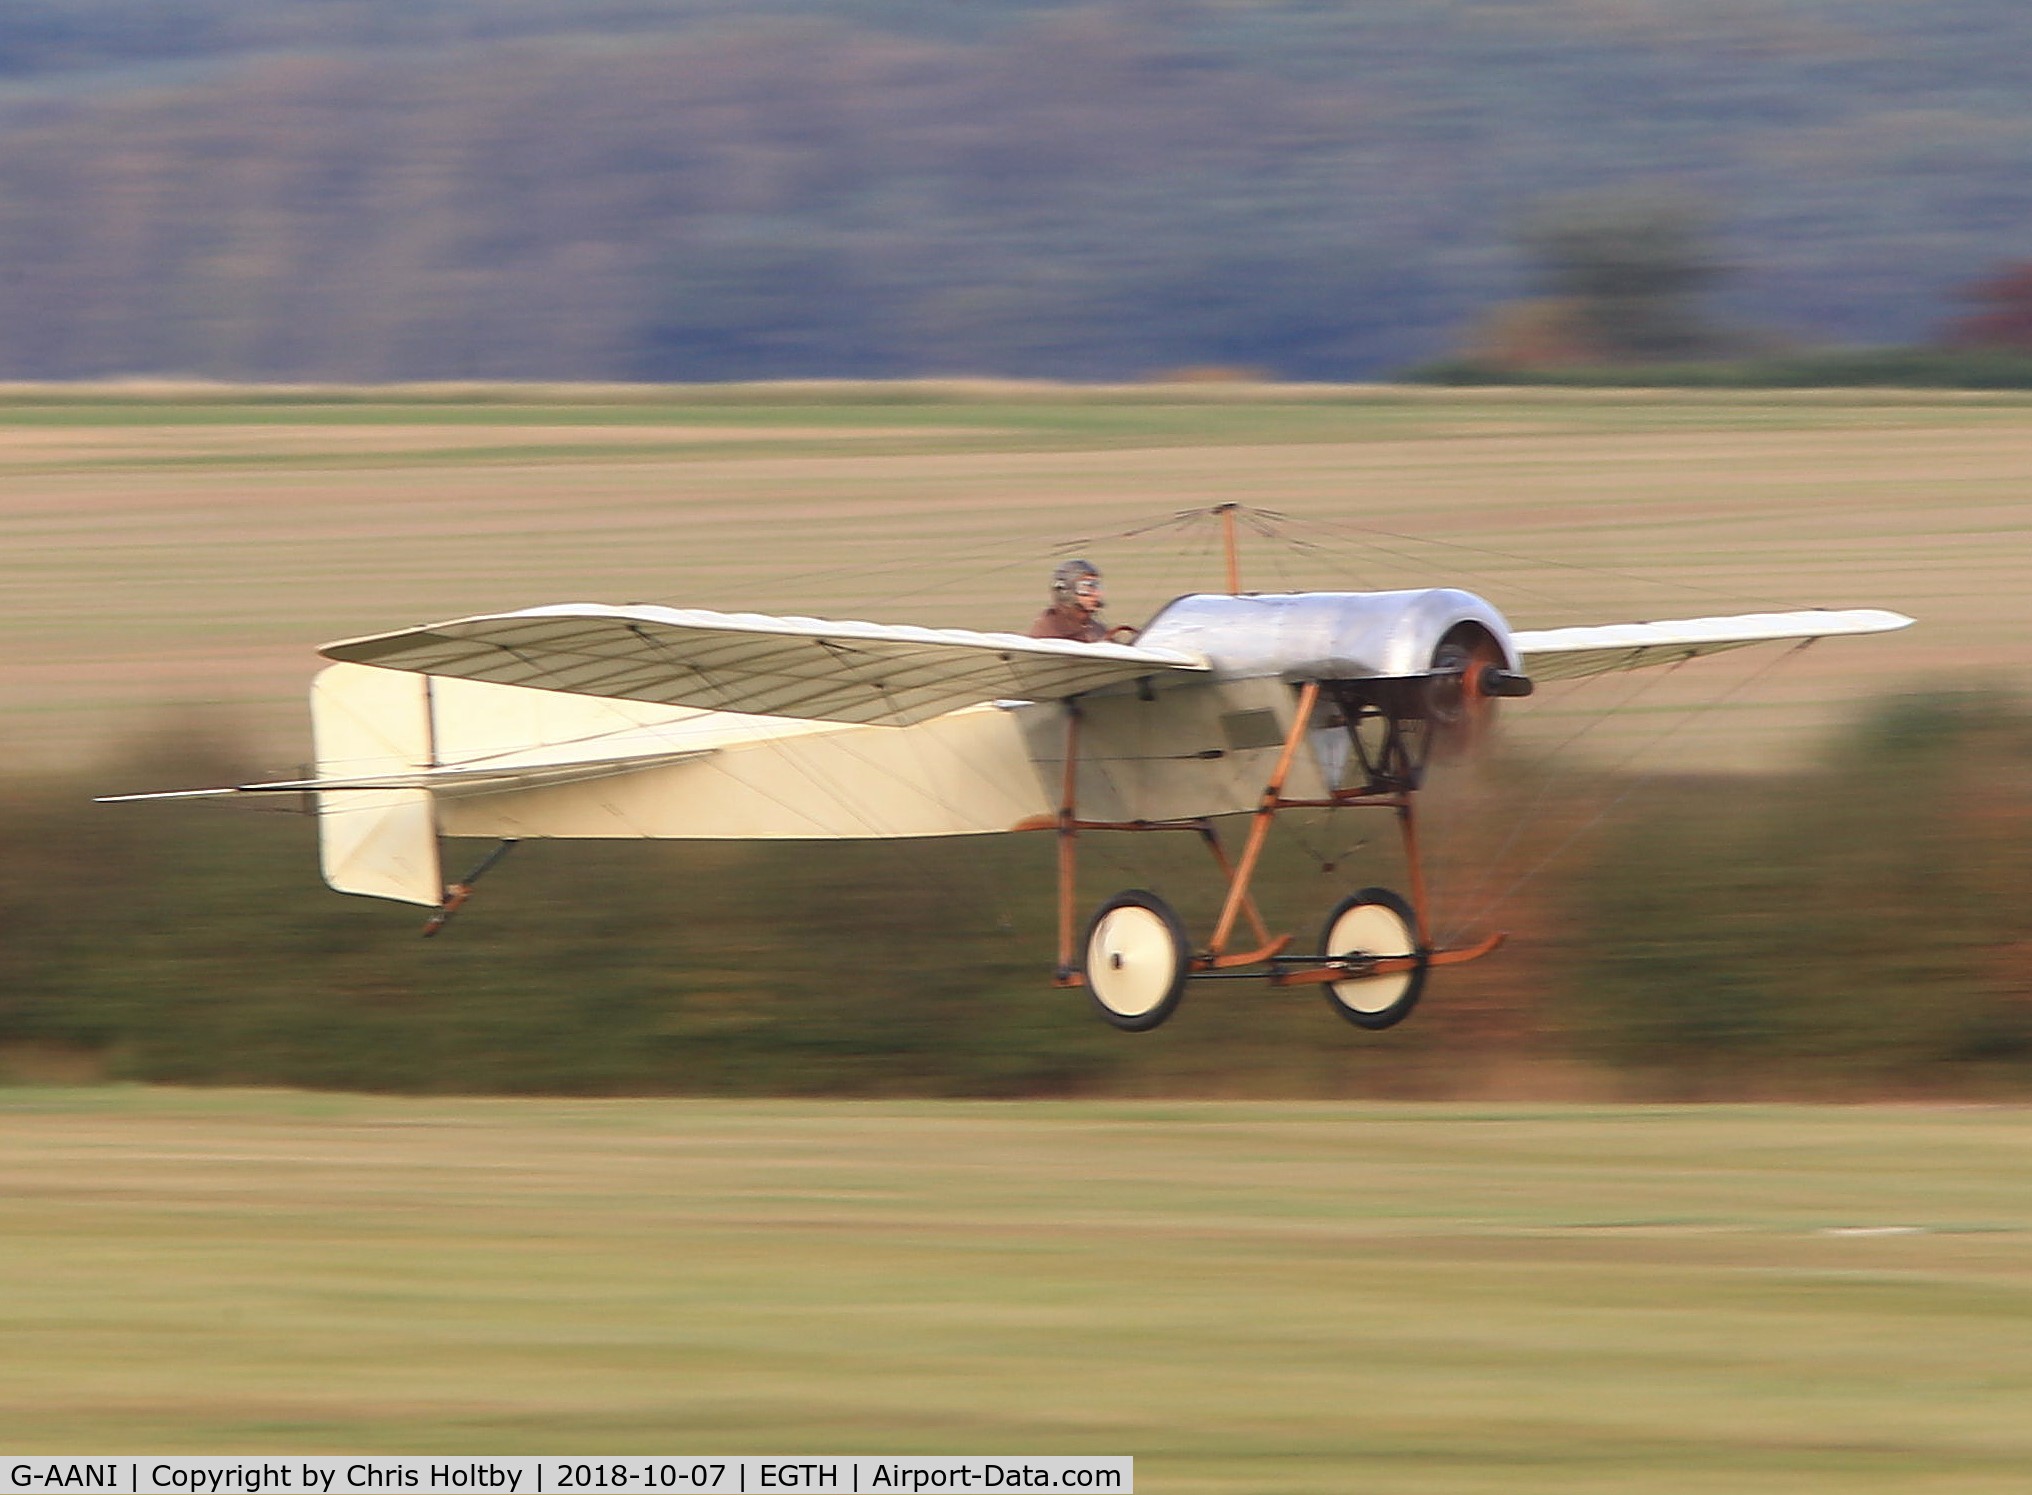 G-AANI, 1912 Blackburn Monoplane C/N 9, Those who waited for the Edwardians finale of the Race Day at Old Warden 2018 were rewarded with the take off of this Blackburn Monoplane in virtually windless conditions. (The same photo posted in error in G-AANH)